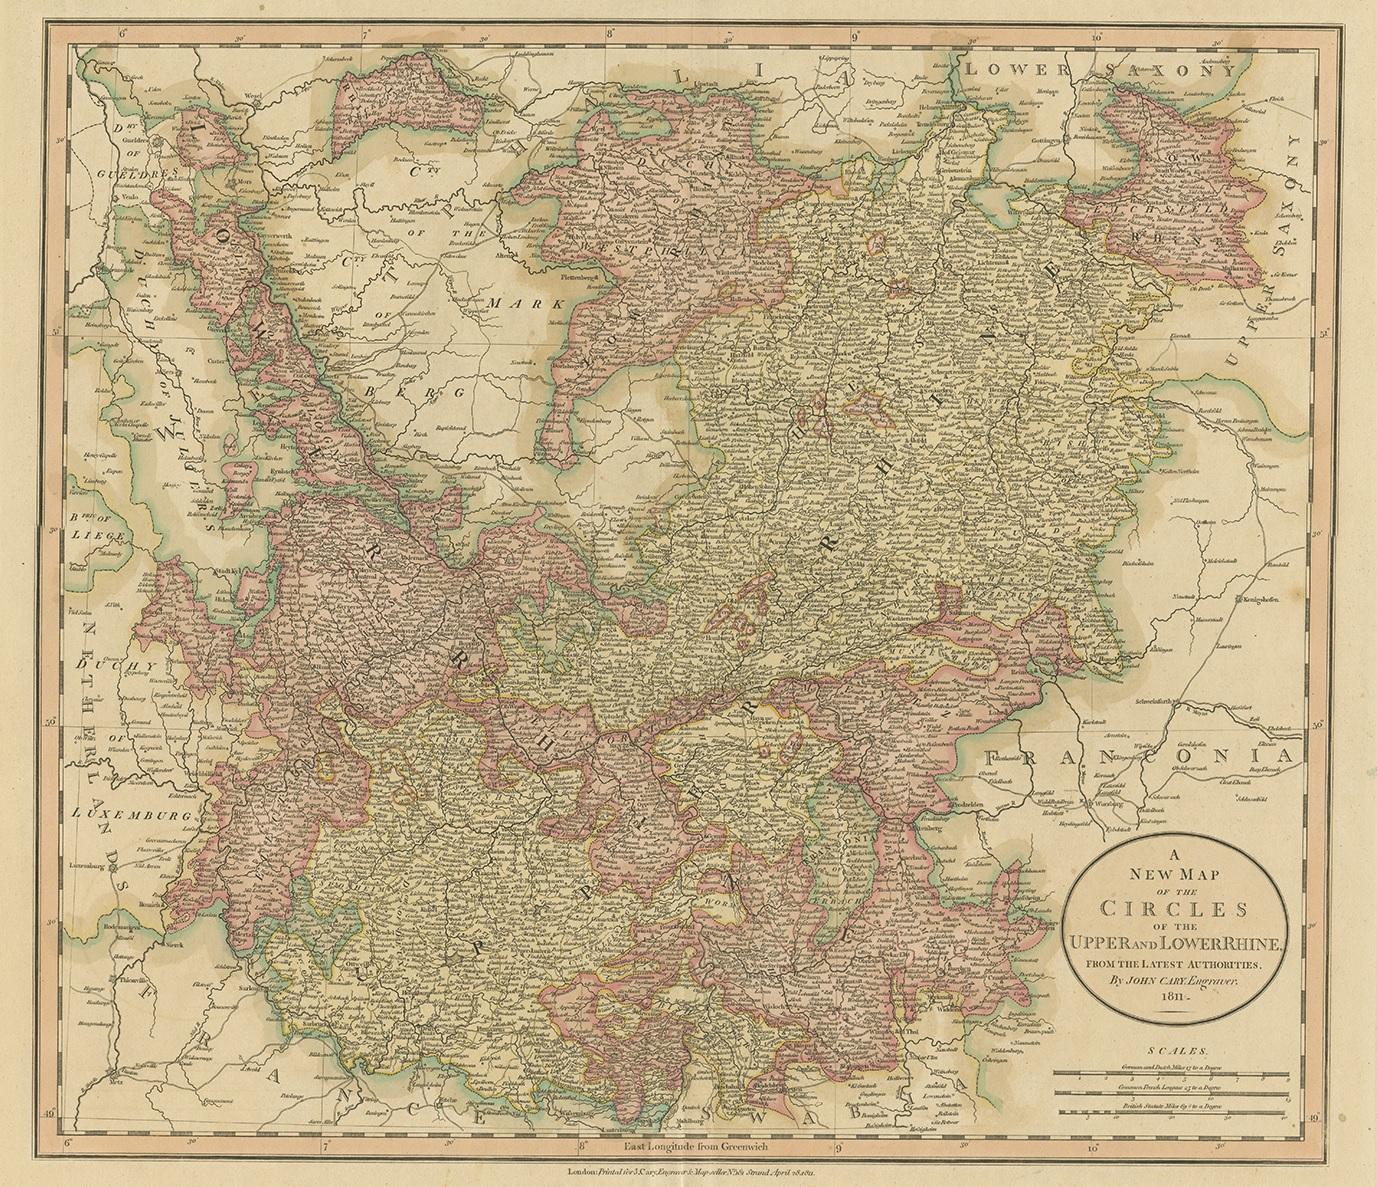 Antique map titled 'A New Map of the Circles of the Upper and Lower Rhine'. Antique map covering an area from Westphalia and Lower Saxony in the north to France and Swabia in the south.